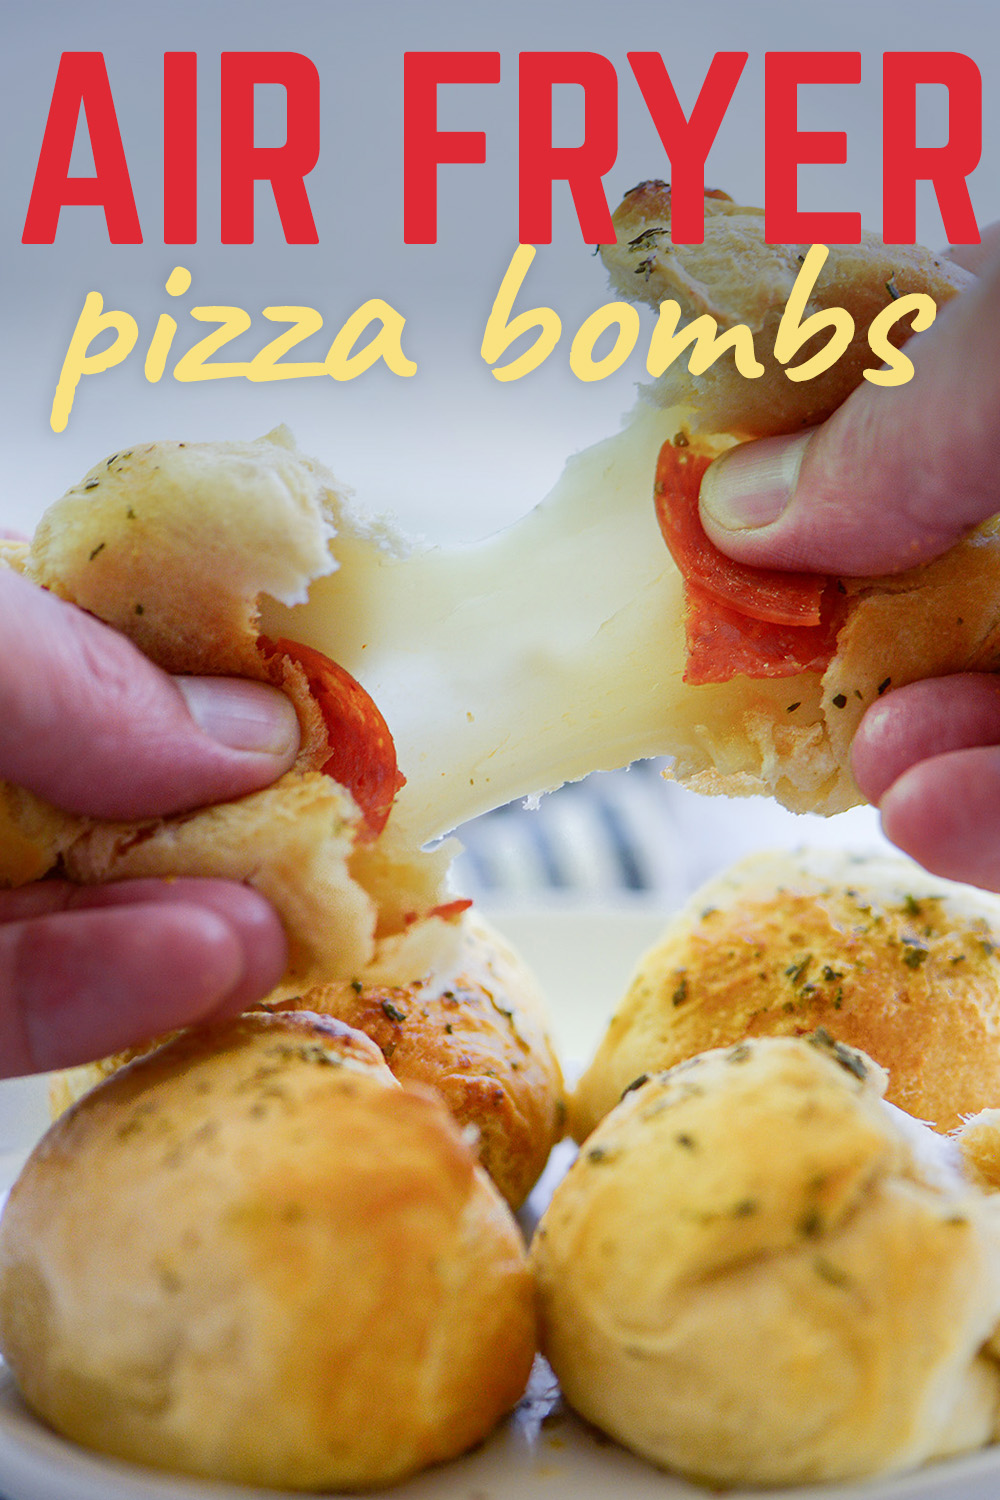 These soft, fluffy, filled little dough balls have a ton of cheese and pepperoni in them!  Be sure to try dipping these pizza bombs in some pizza sauce for the perfect appetizer!